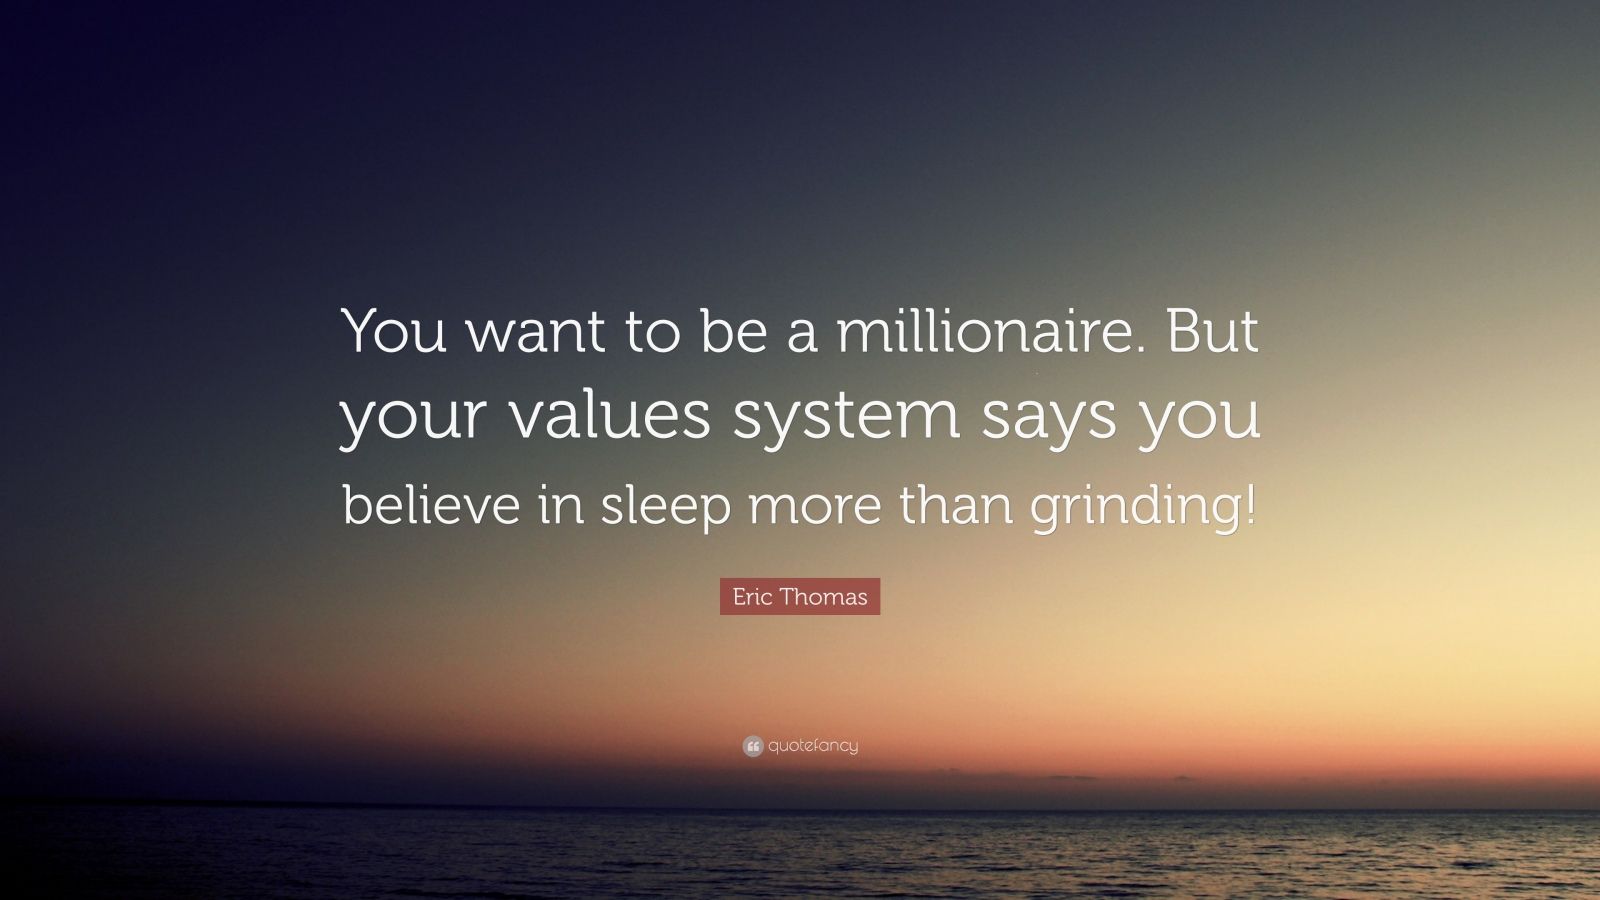 Eric Thomas Quote: “You want to be a millionaire. But your values